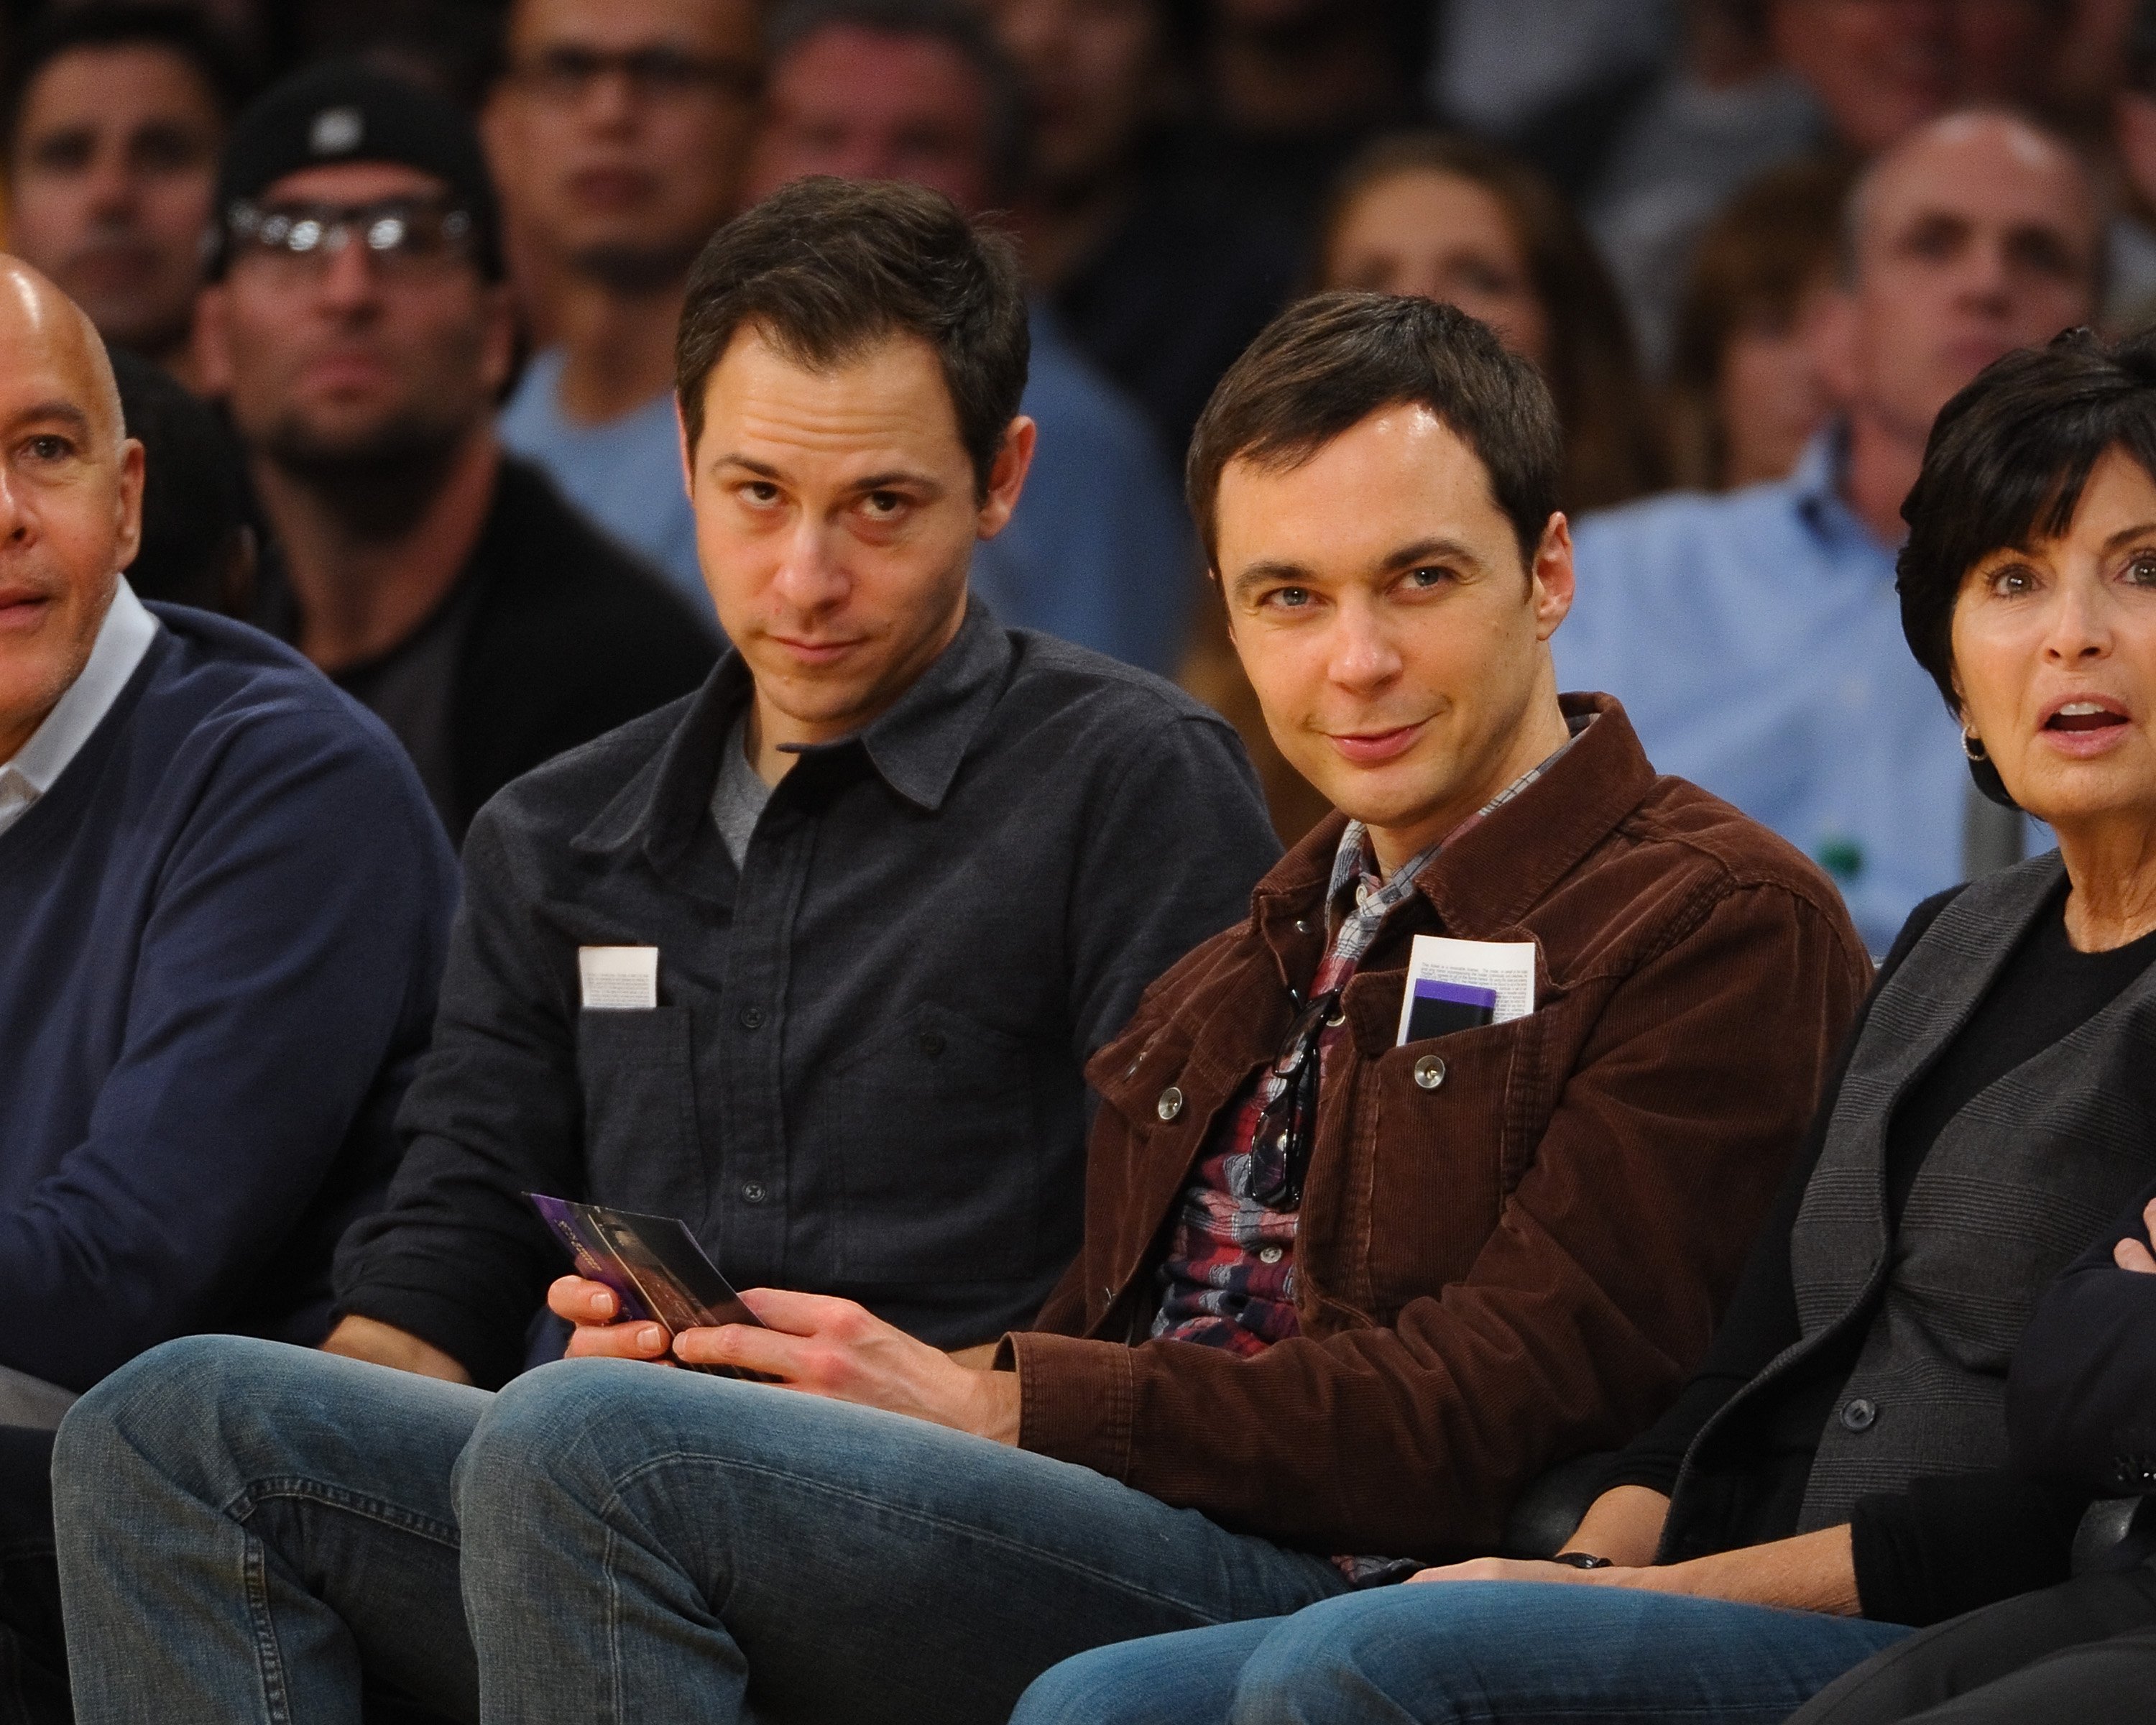 Jim Parsons and Todd Spiewak attend a basketball game at Staples Center on November 4, 2012 in Los Angeles, California. | Source: Getty Imags